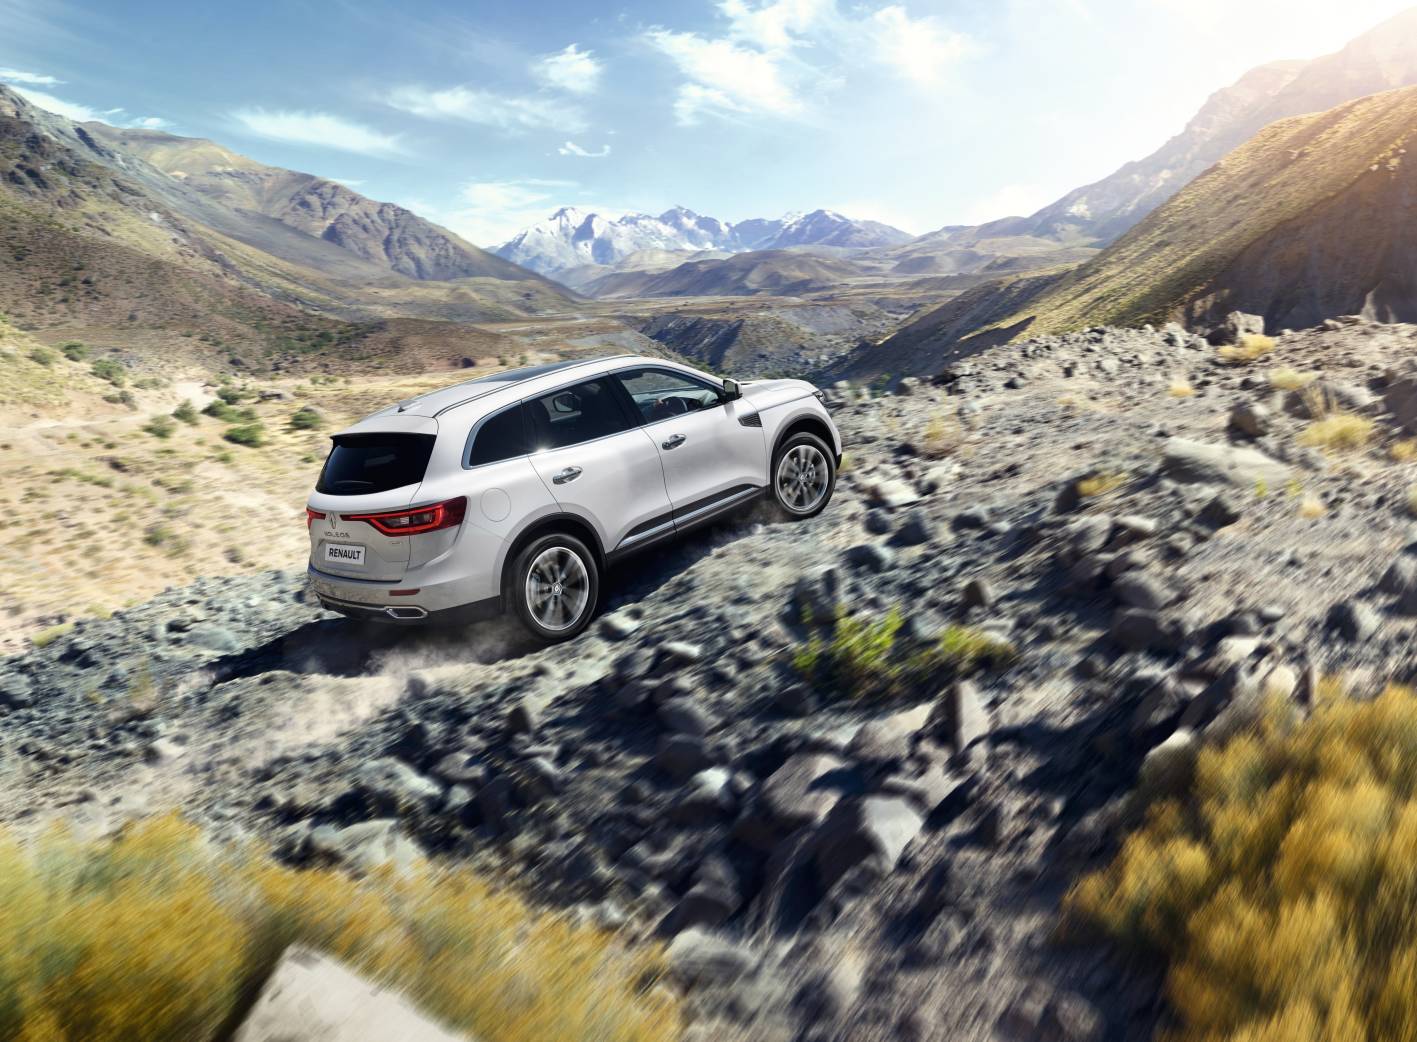 The All-New Renault Koleos: Out Of The Ordinary